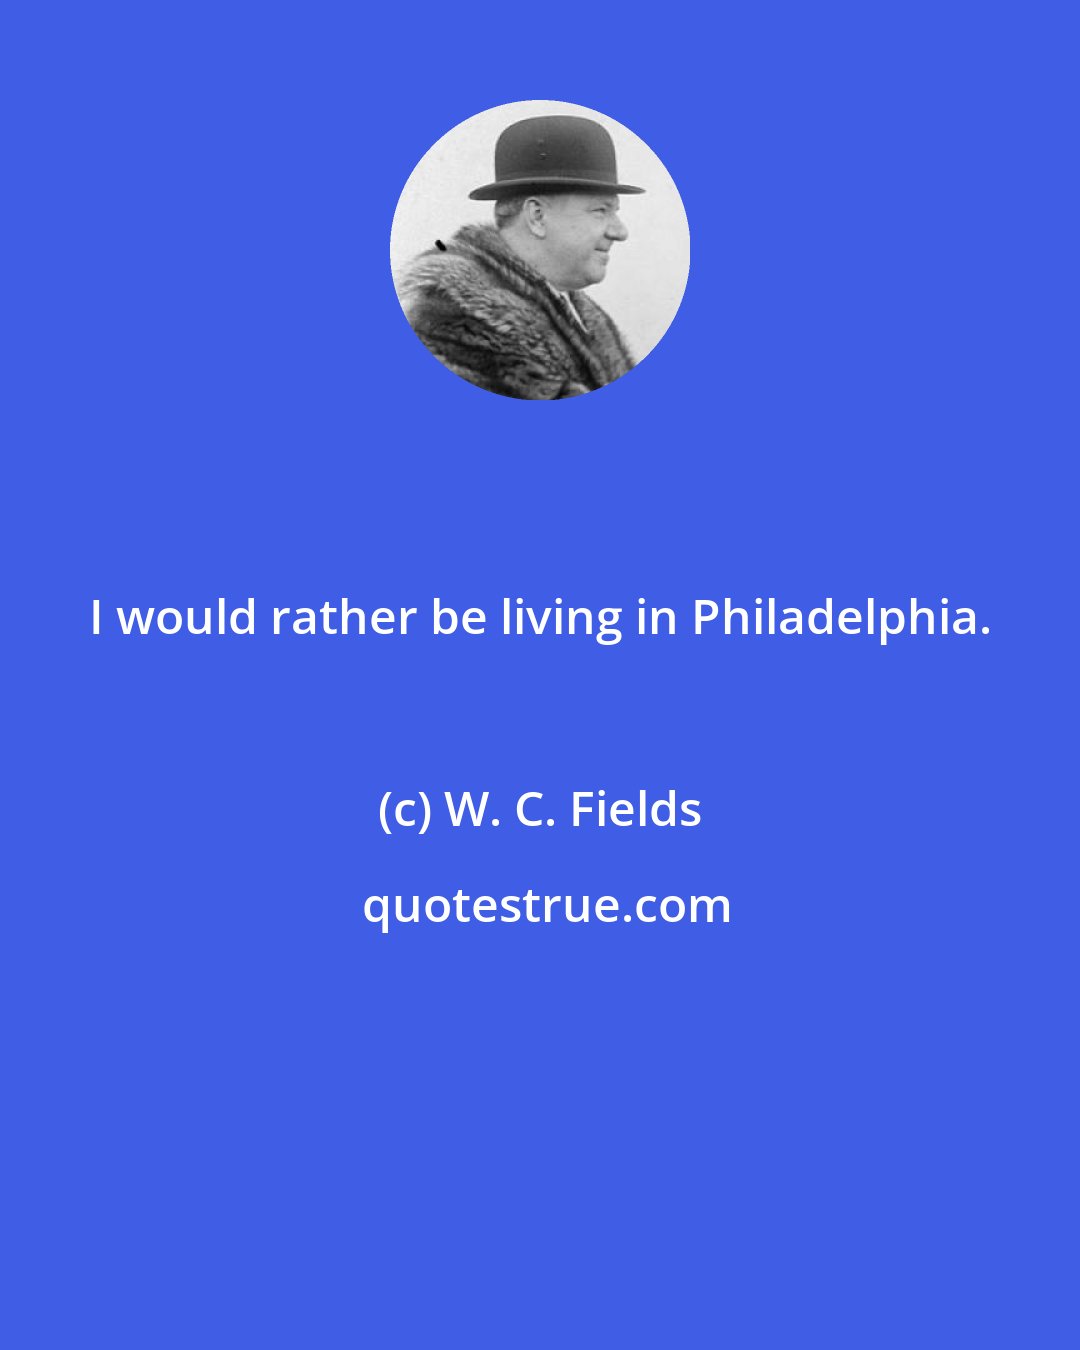 W. C. Fields: I would rather be living in Philadelphia.